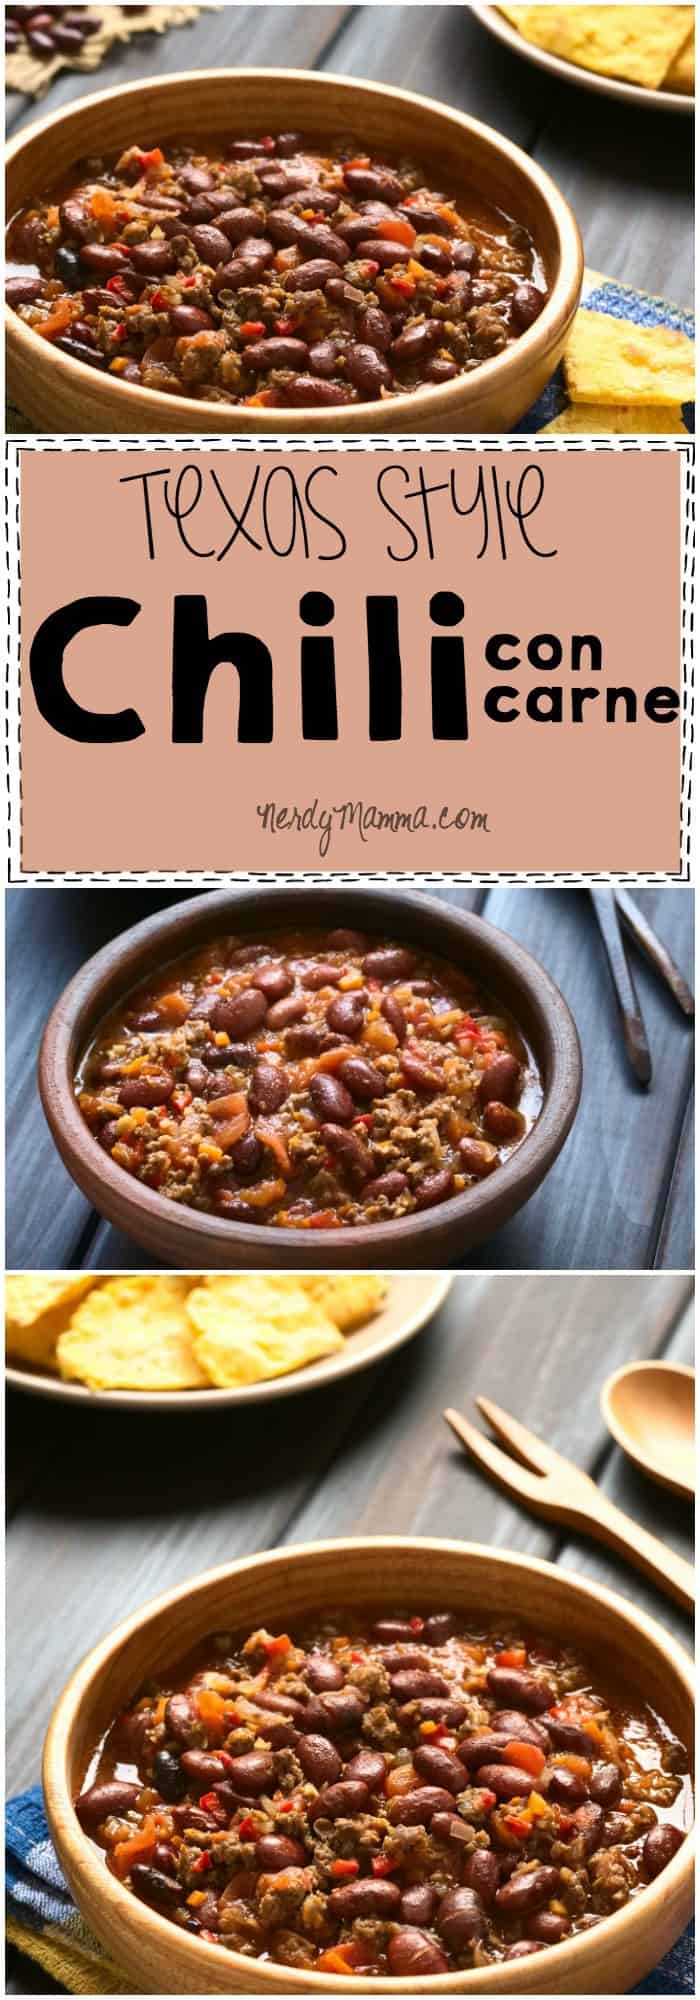 I love this recipe for Texas Style Chili con Carne. Which is just chili with meat, by the way! LOL!